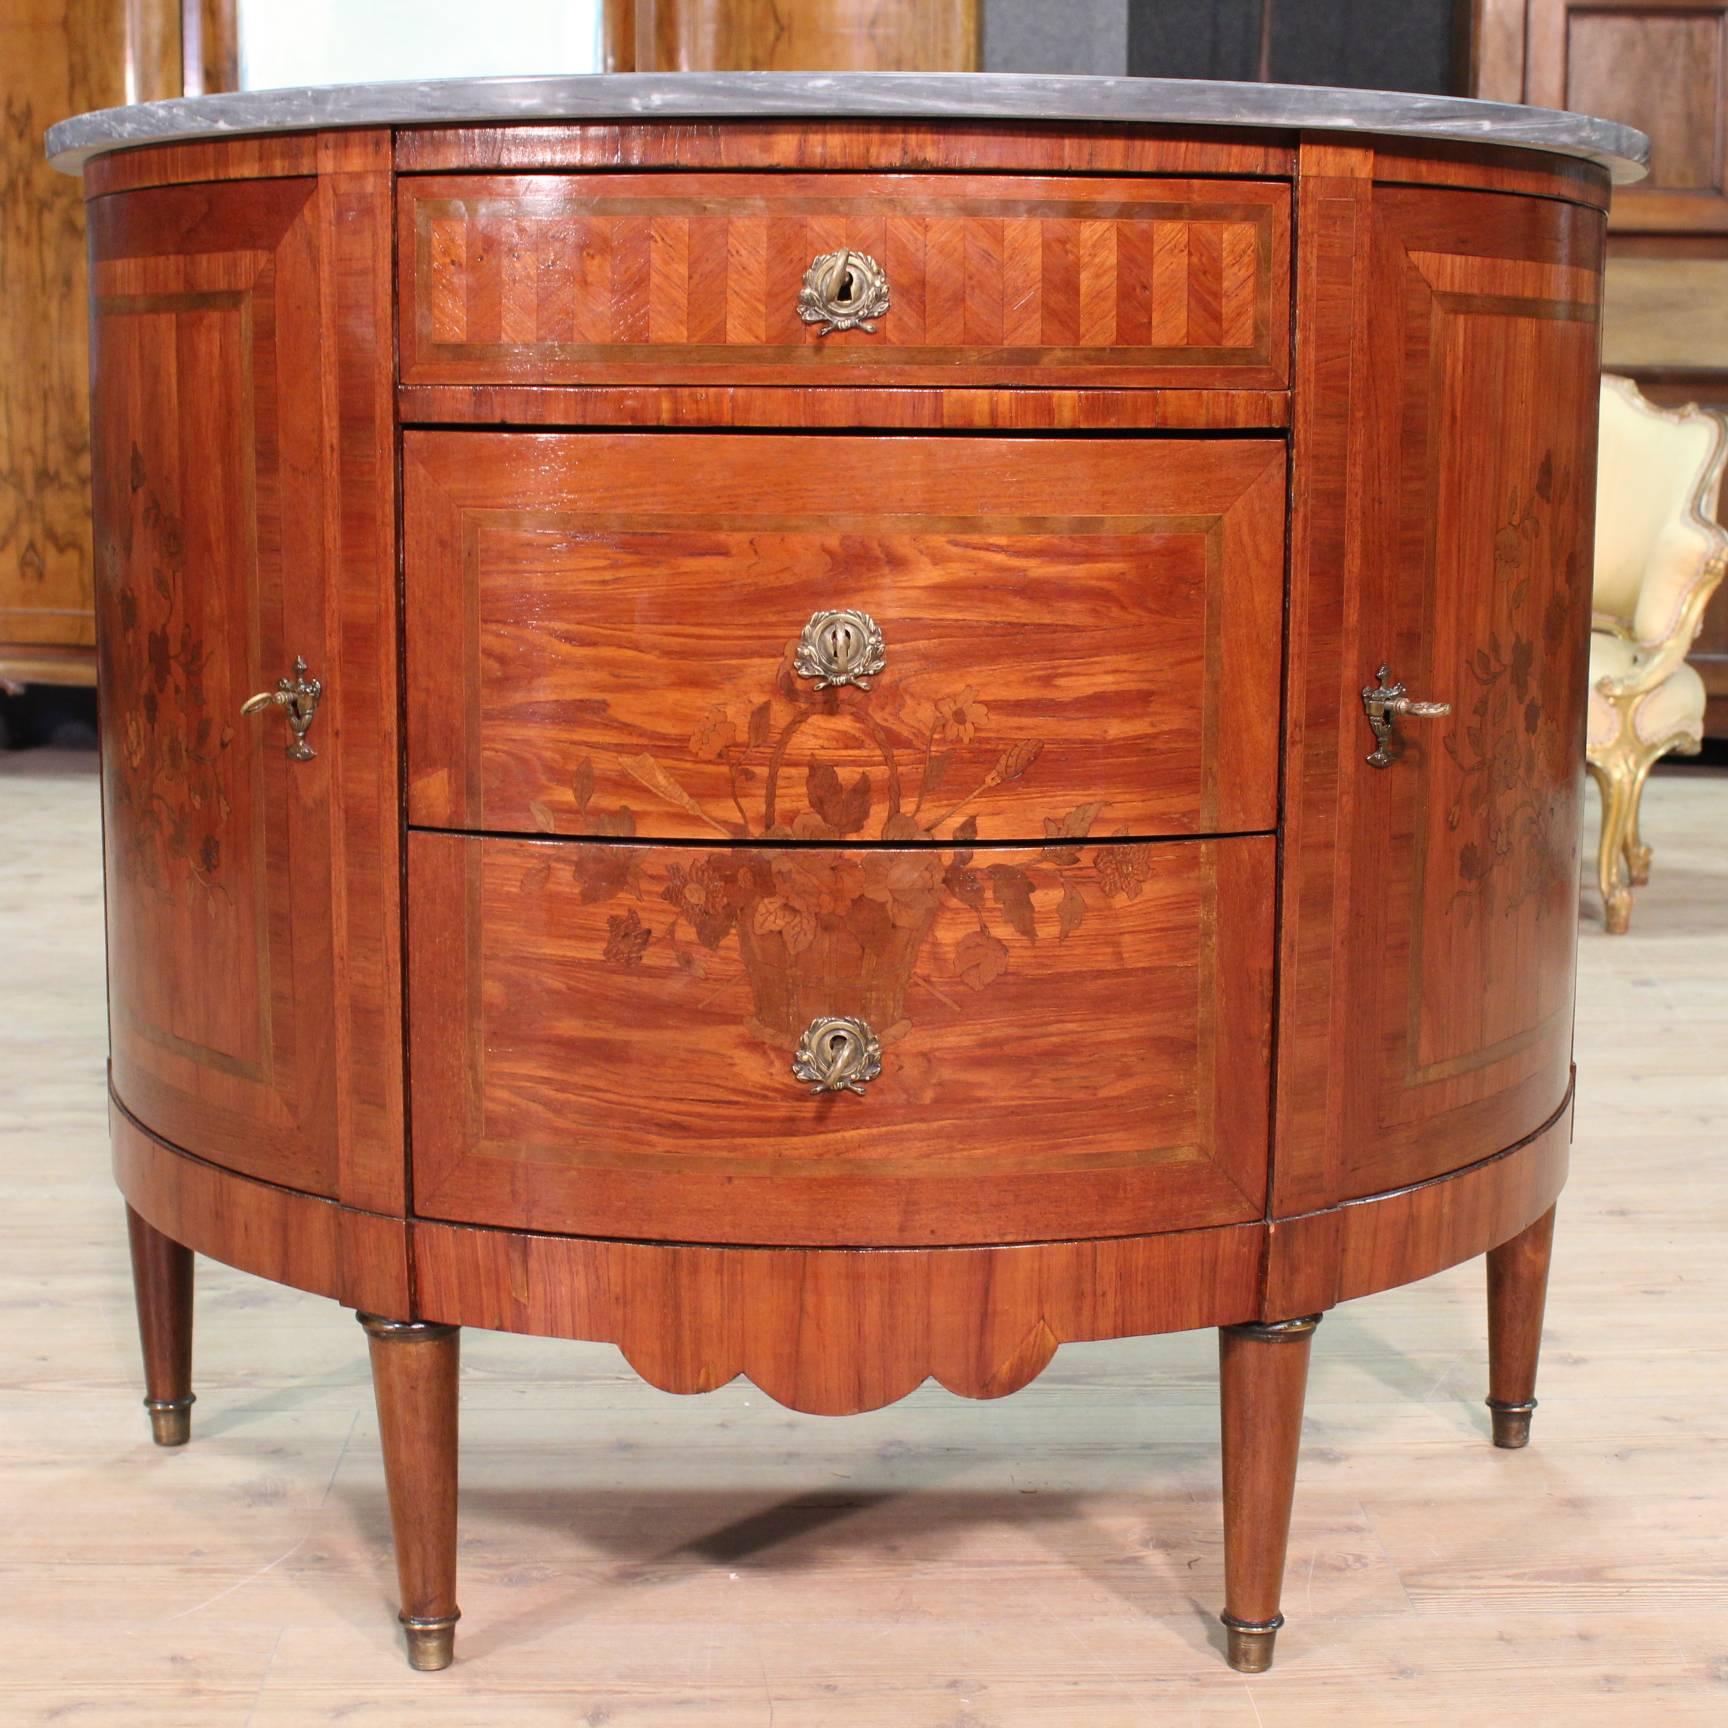 Nice demilune chest of drawers or sideboard, France, 19th century. Furniture carved and inlaid in rosewood, toulipier, cherry, walnut and alder of fine line. Furniture with three drawers and two doors of good proportions and good service, complete